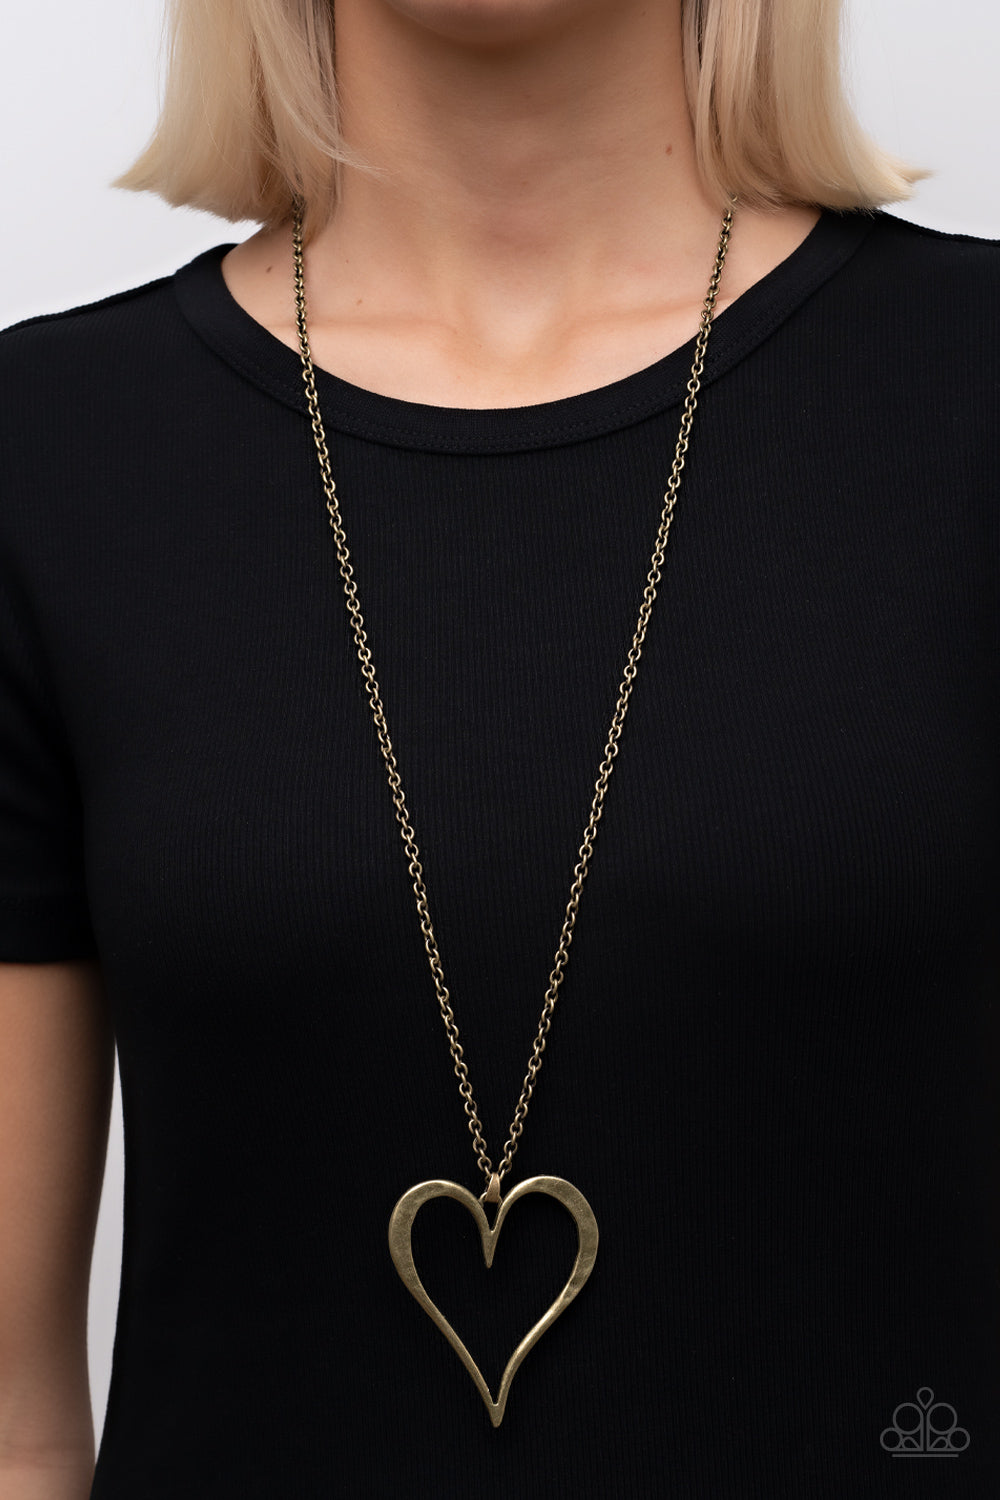 Paparazzi Hopelessly In Love Brass Long Necklace - P2WH-BRXX-169XX